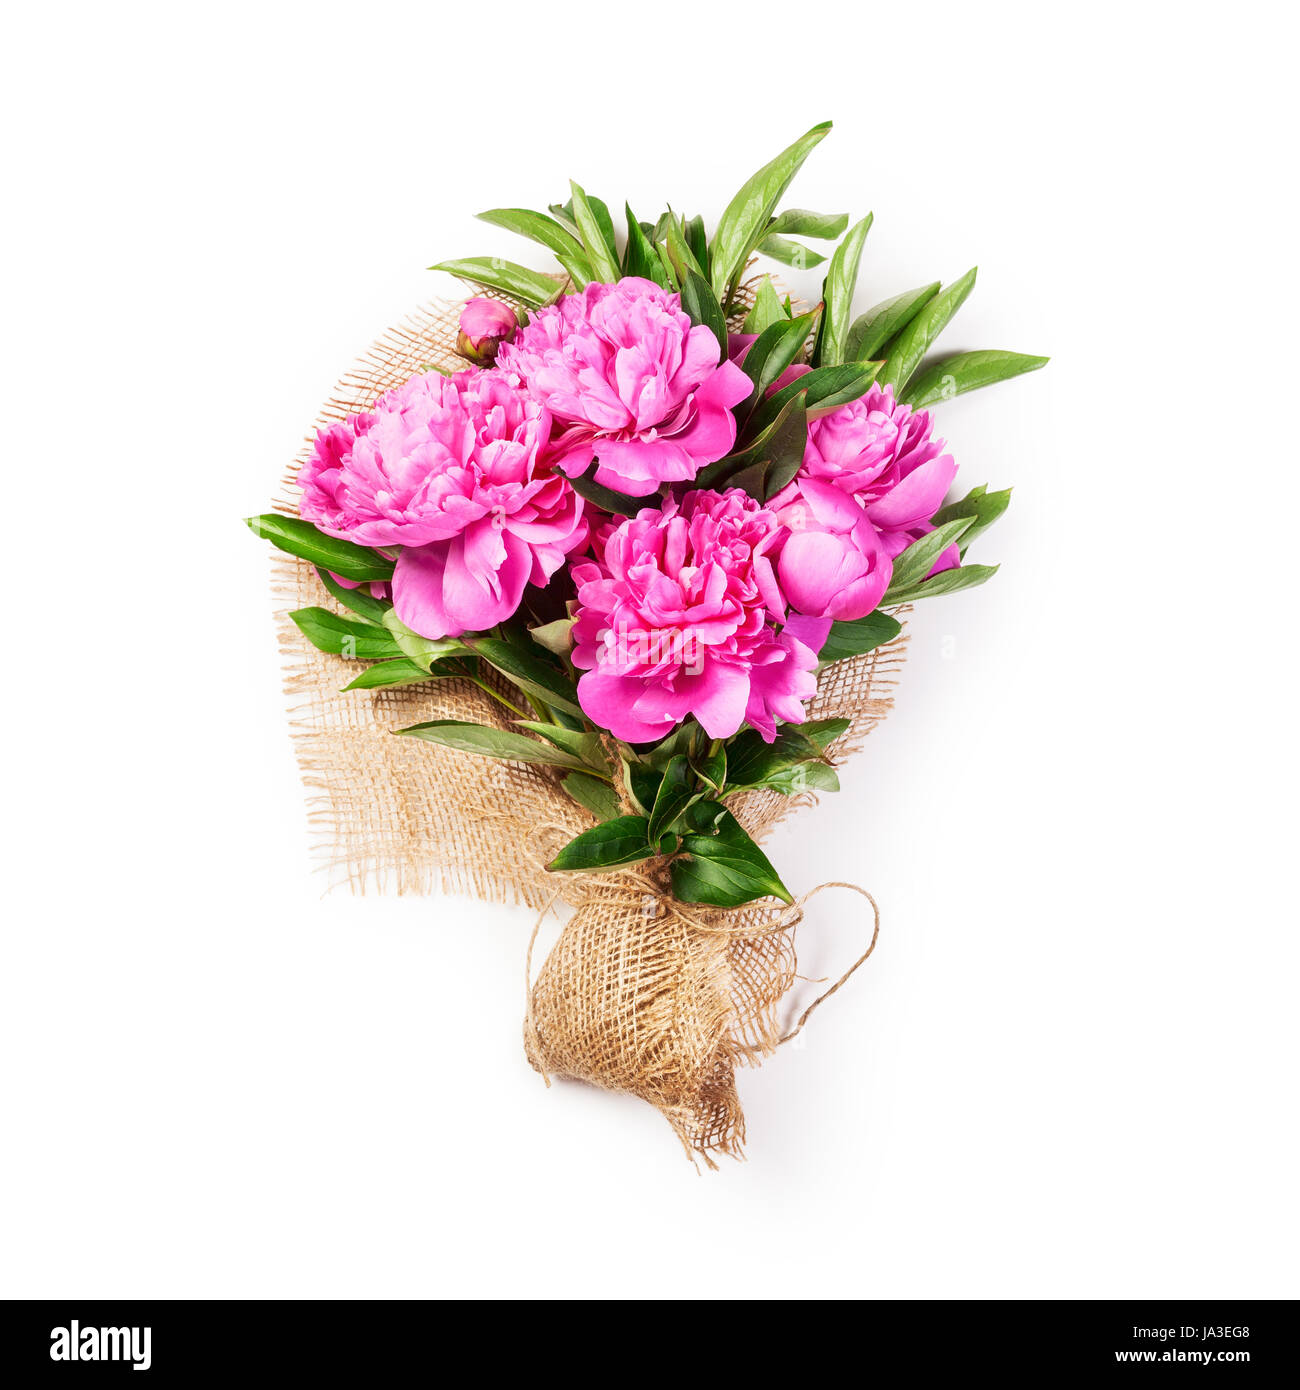 Pink peony flowers bouquet with jute burlap fabric. Single object isolated on white background. Flower arrangement Stock Photo